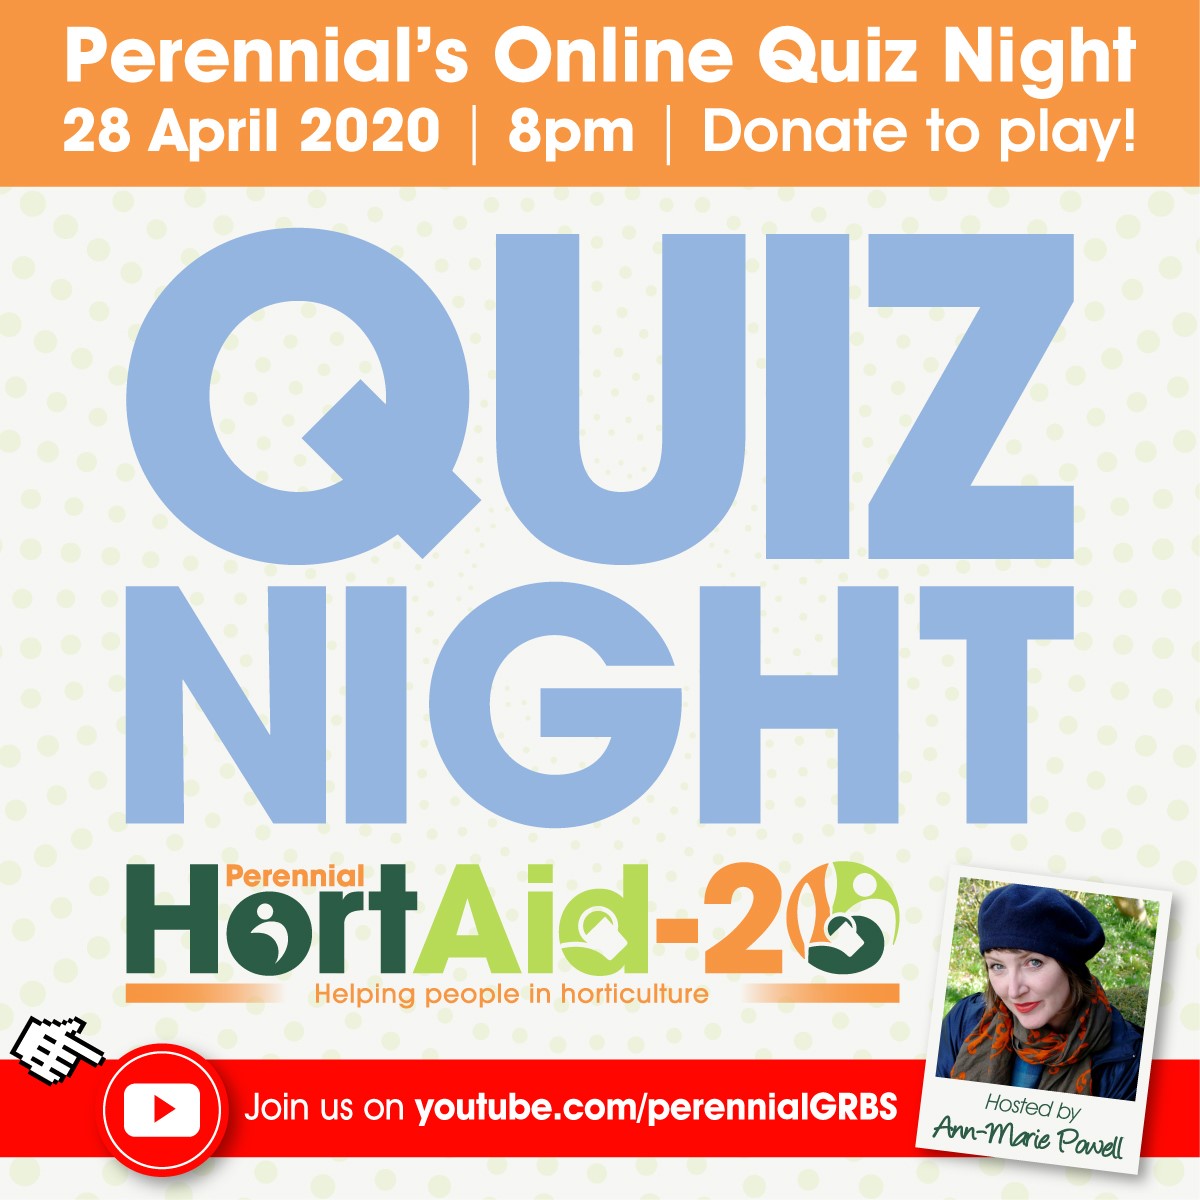 Perennial’s Online Quiz Night | 28 April 2020 | 8pm | Donate to play!